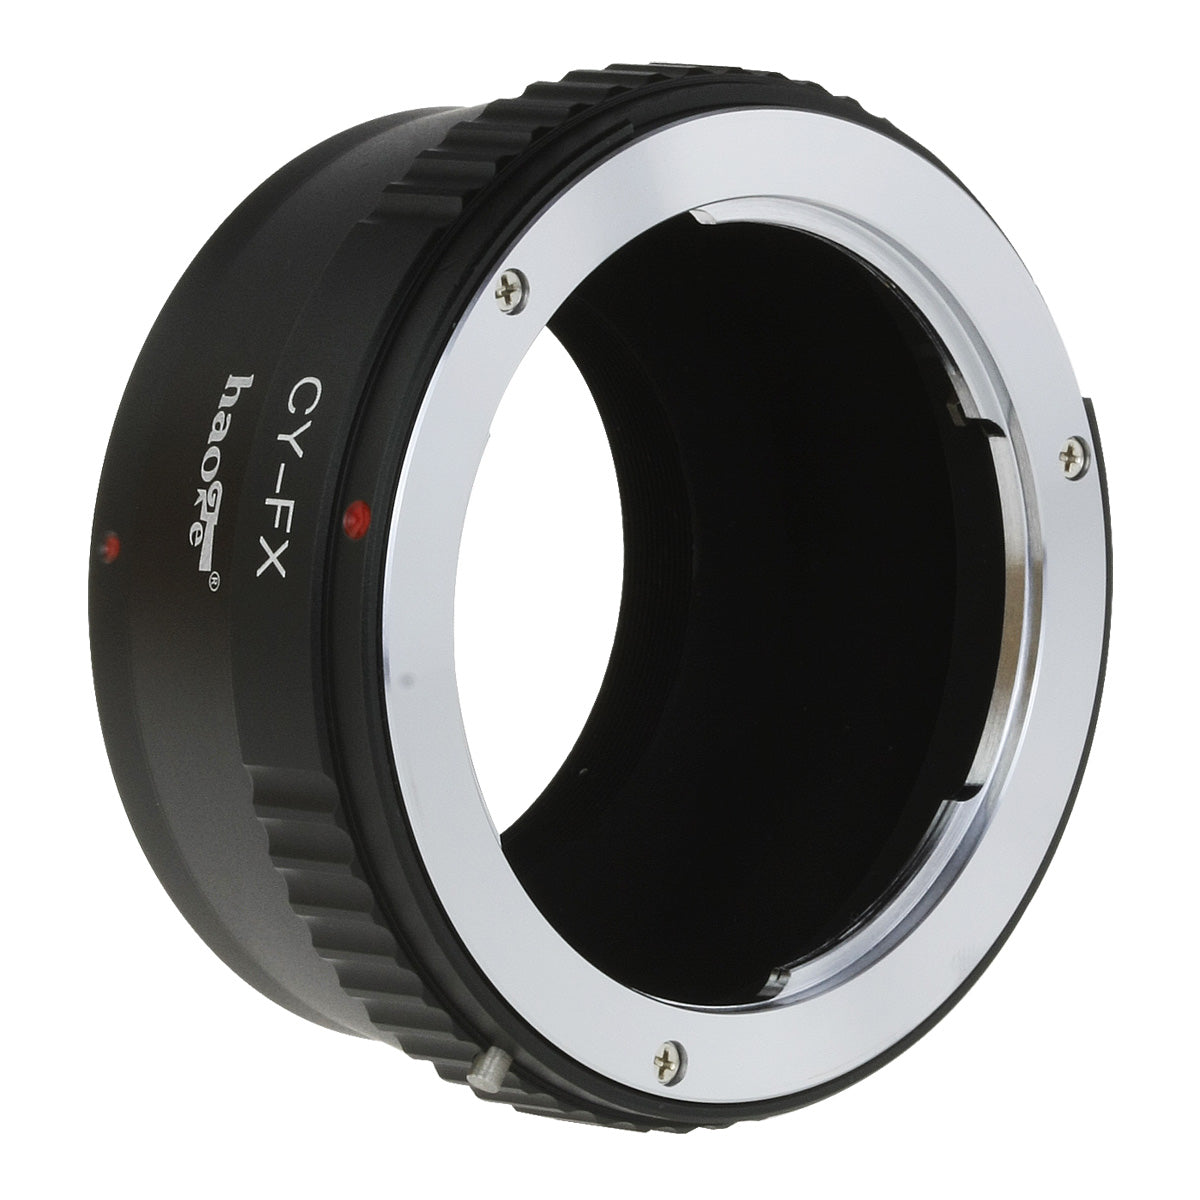 Haoge Lens Mount Adapter for Contax / Yashica C/Y CY mount Lens to Fujifilm X-mount Camera such as X-A1, X-A2, X-A3, X-A10, X-E1, X-E2, X-E2s, X-M1, X-Pro1, X-Pro2, X-T1, X-T2, X-T10, X-T20